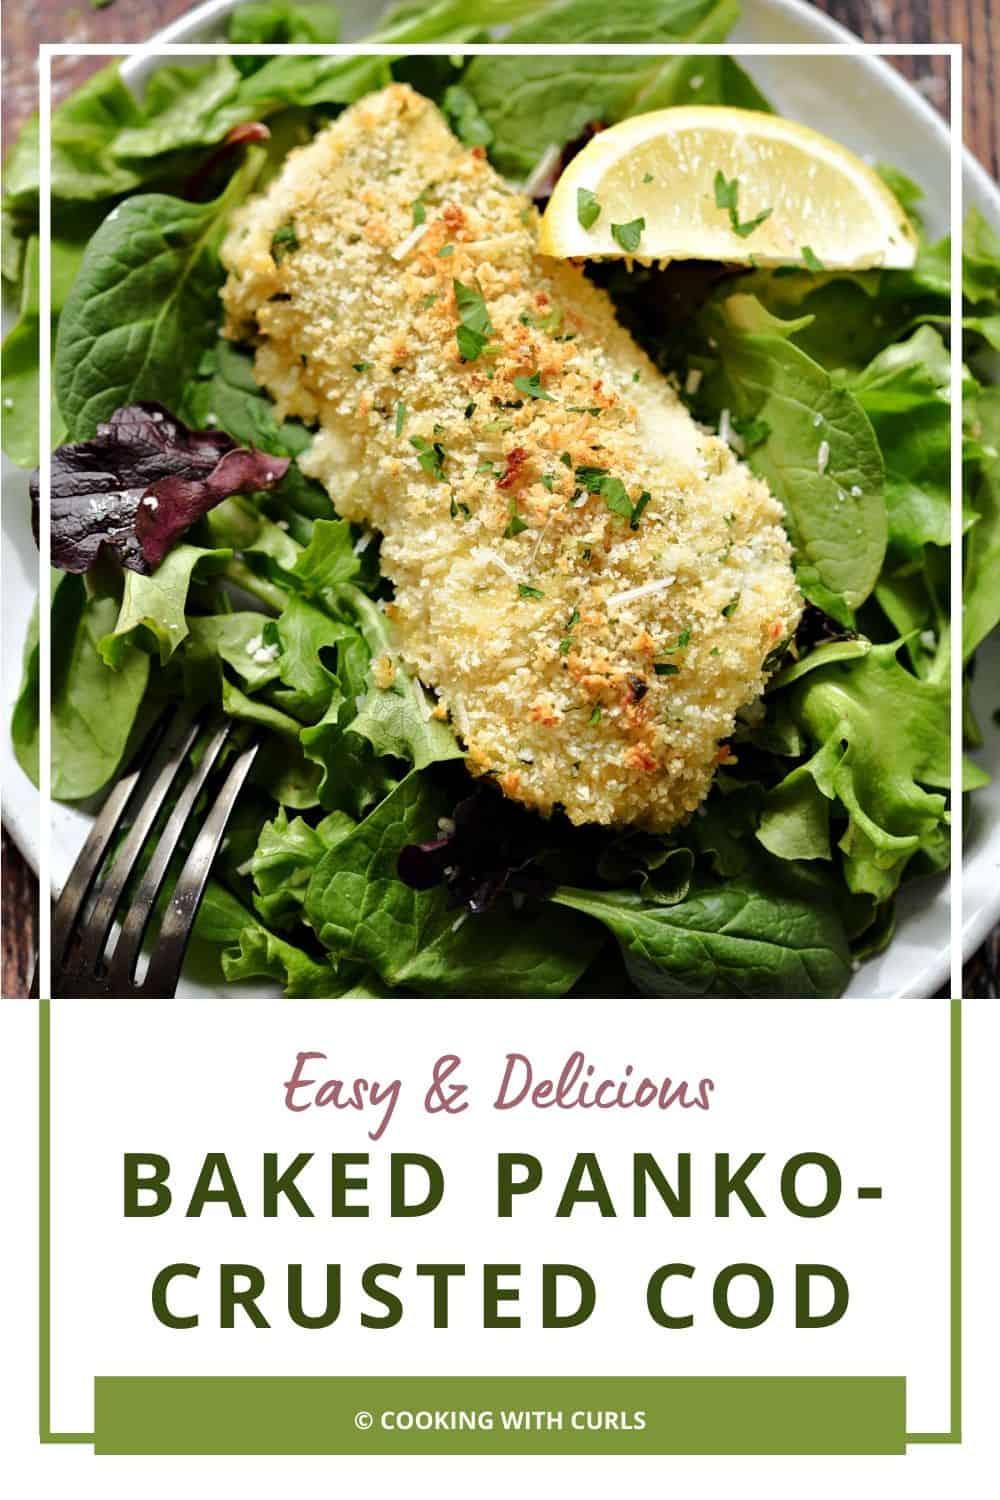 Baked Panko-Crusted Cod - Cooking with Curls